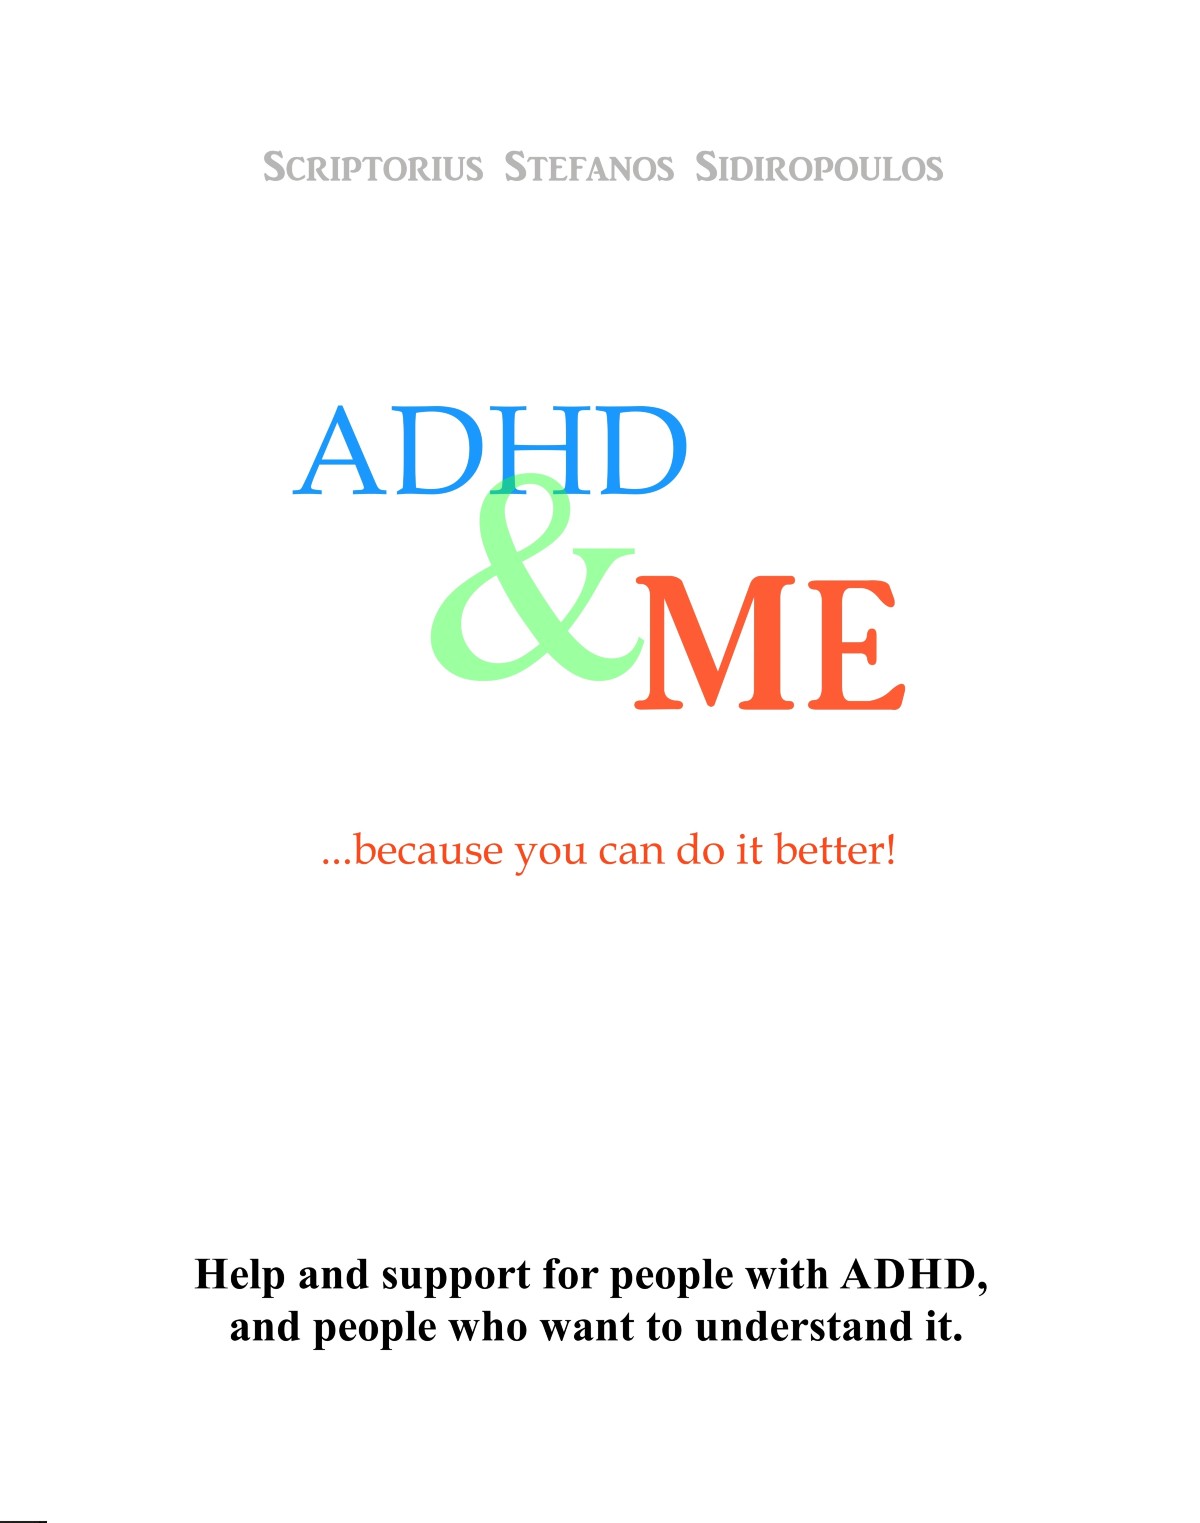 ADHD and ME: ...because you can do it better!